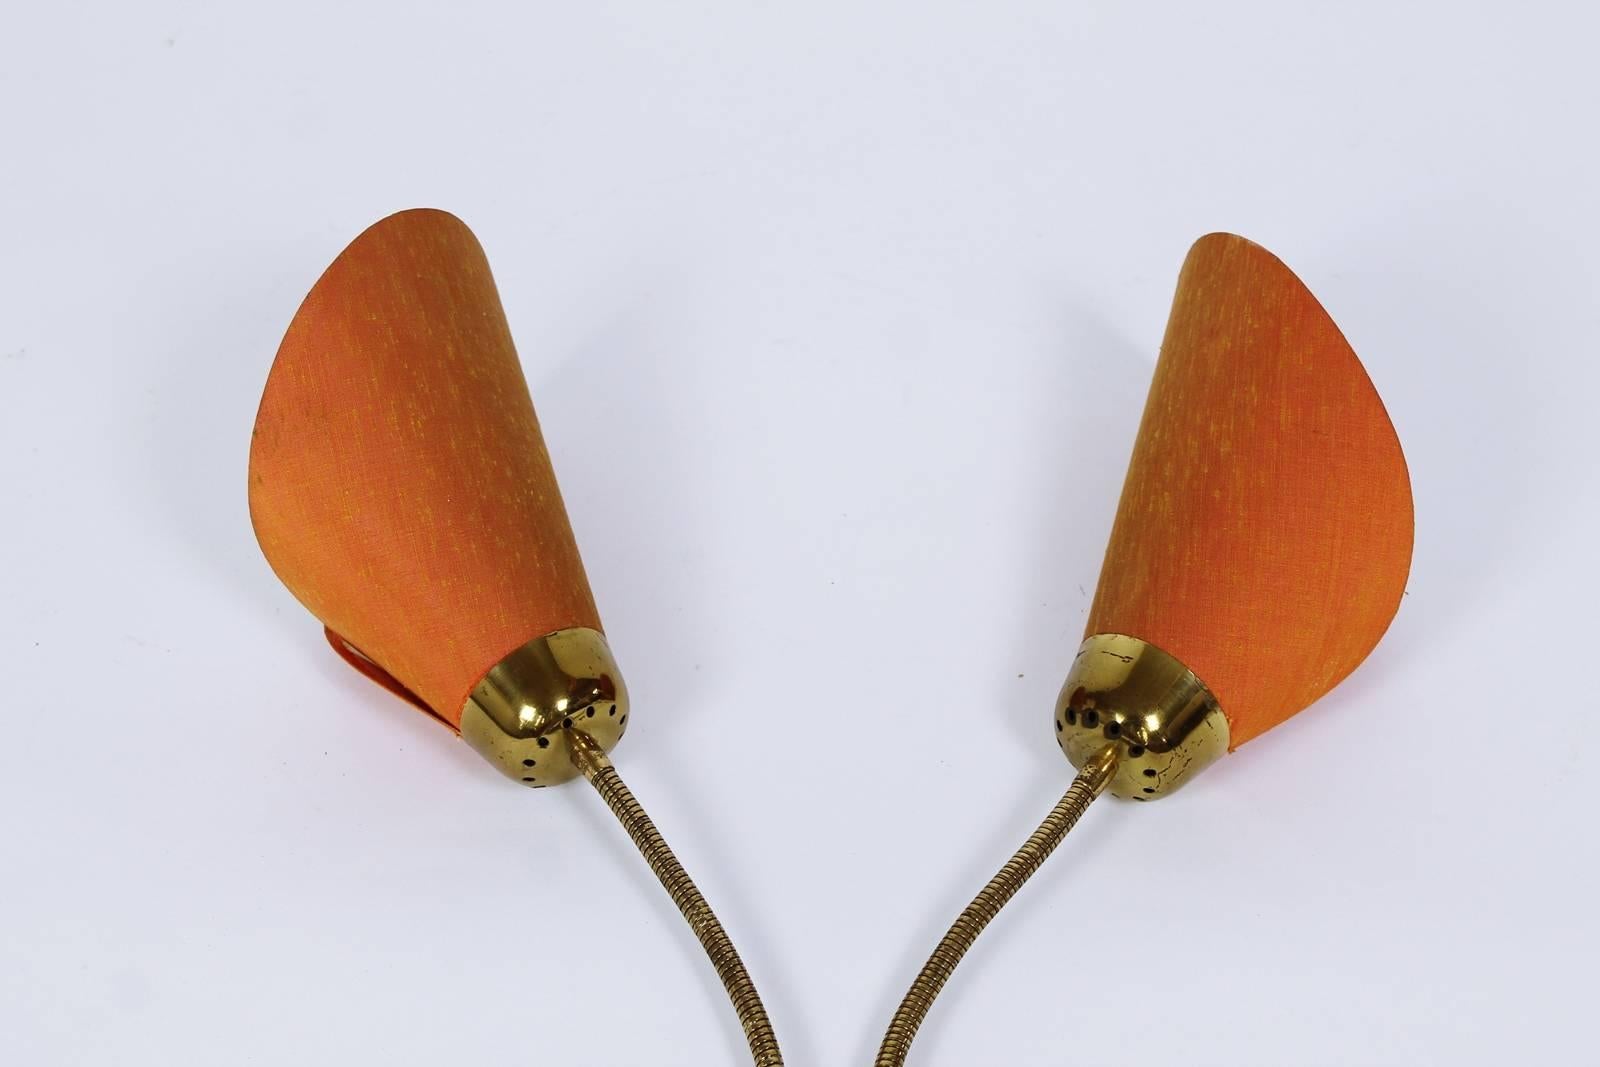  Stunning Mid century brass wall lamp produced in Italy in the 1950s. Has a brass base and two adjustable gooseneck arms.
Shades are made of orange fabric in good vintage condition
.
 